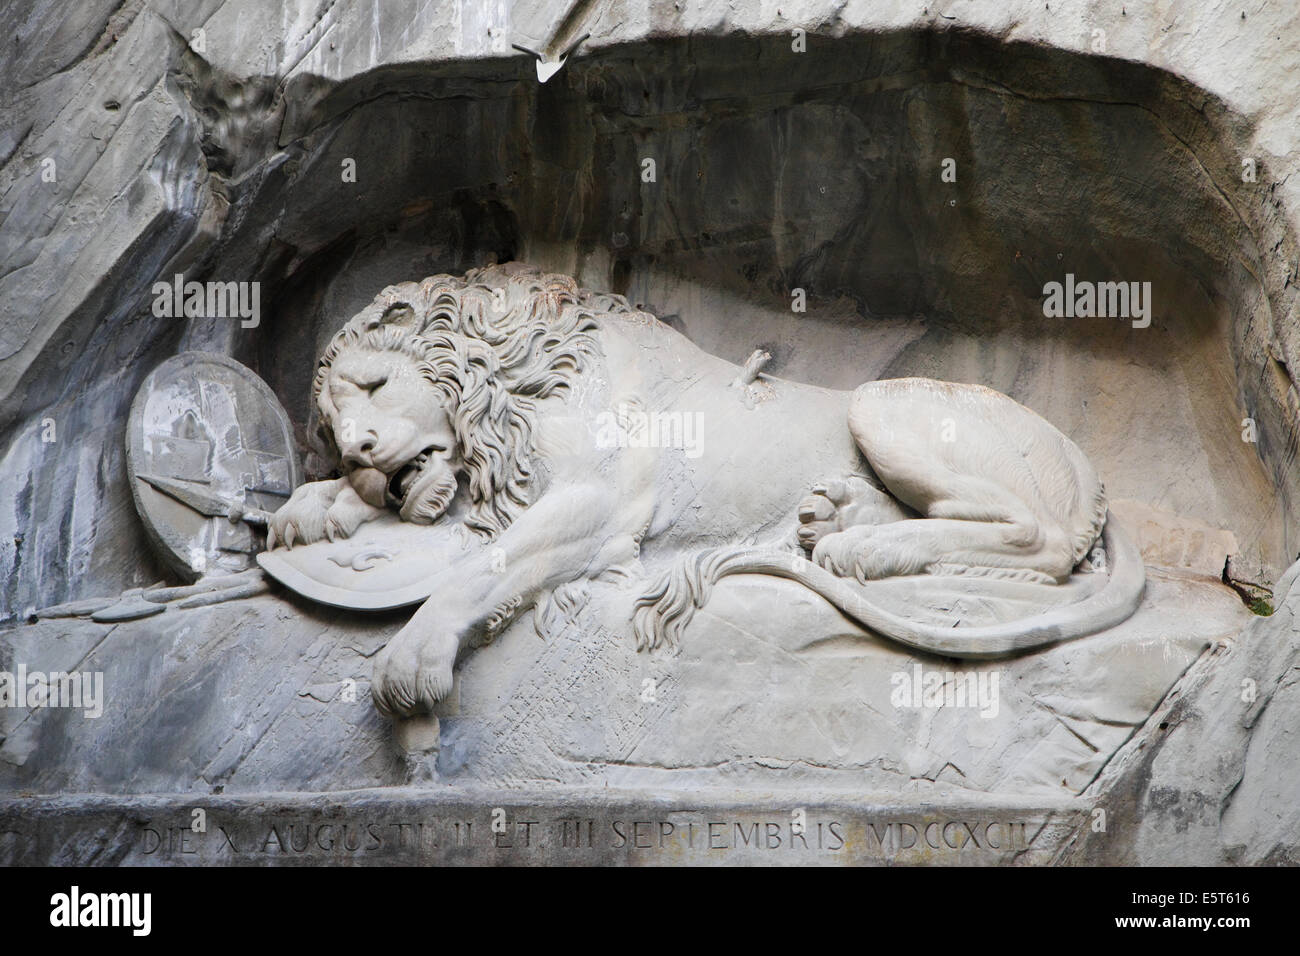 The Lion Monument, designed by Bertel Thorvaldsen and hewn in 1821 by Lukas Ahorn in Lucerne, Switzerland. Stock Photo